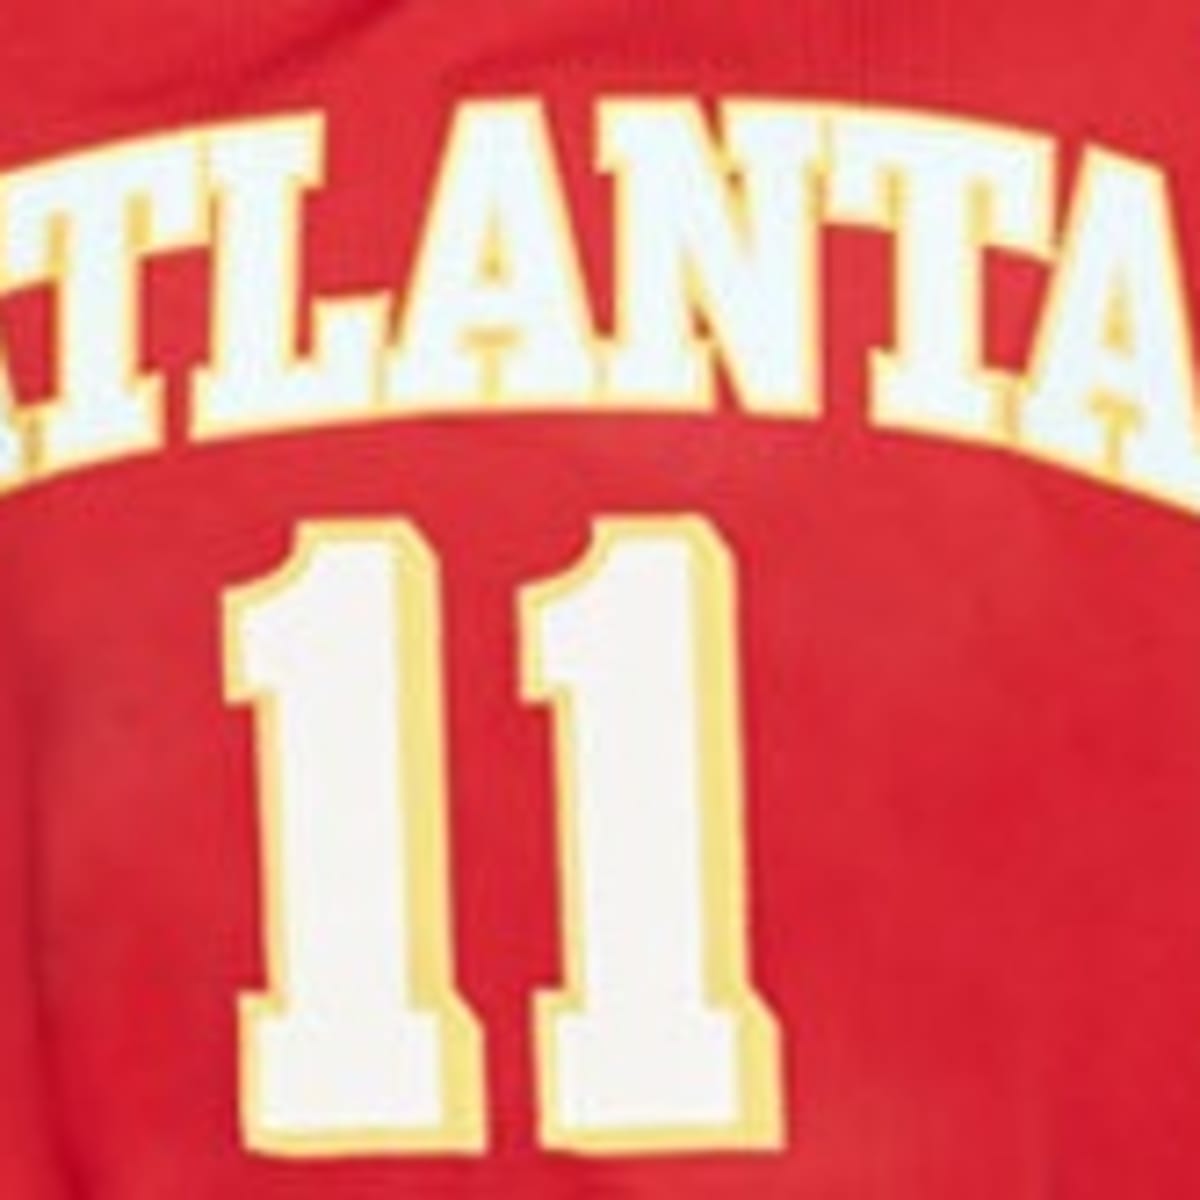 Hawks unveil three new uniforms with cleaner, more vintage touch